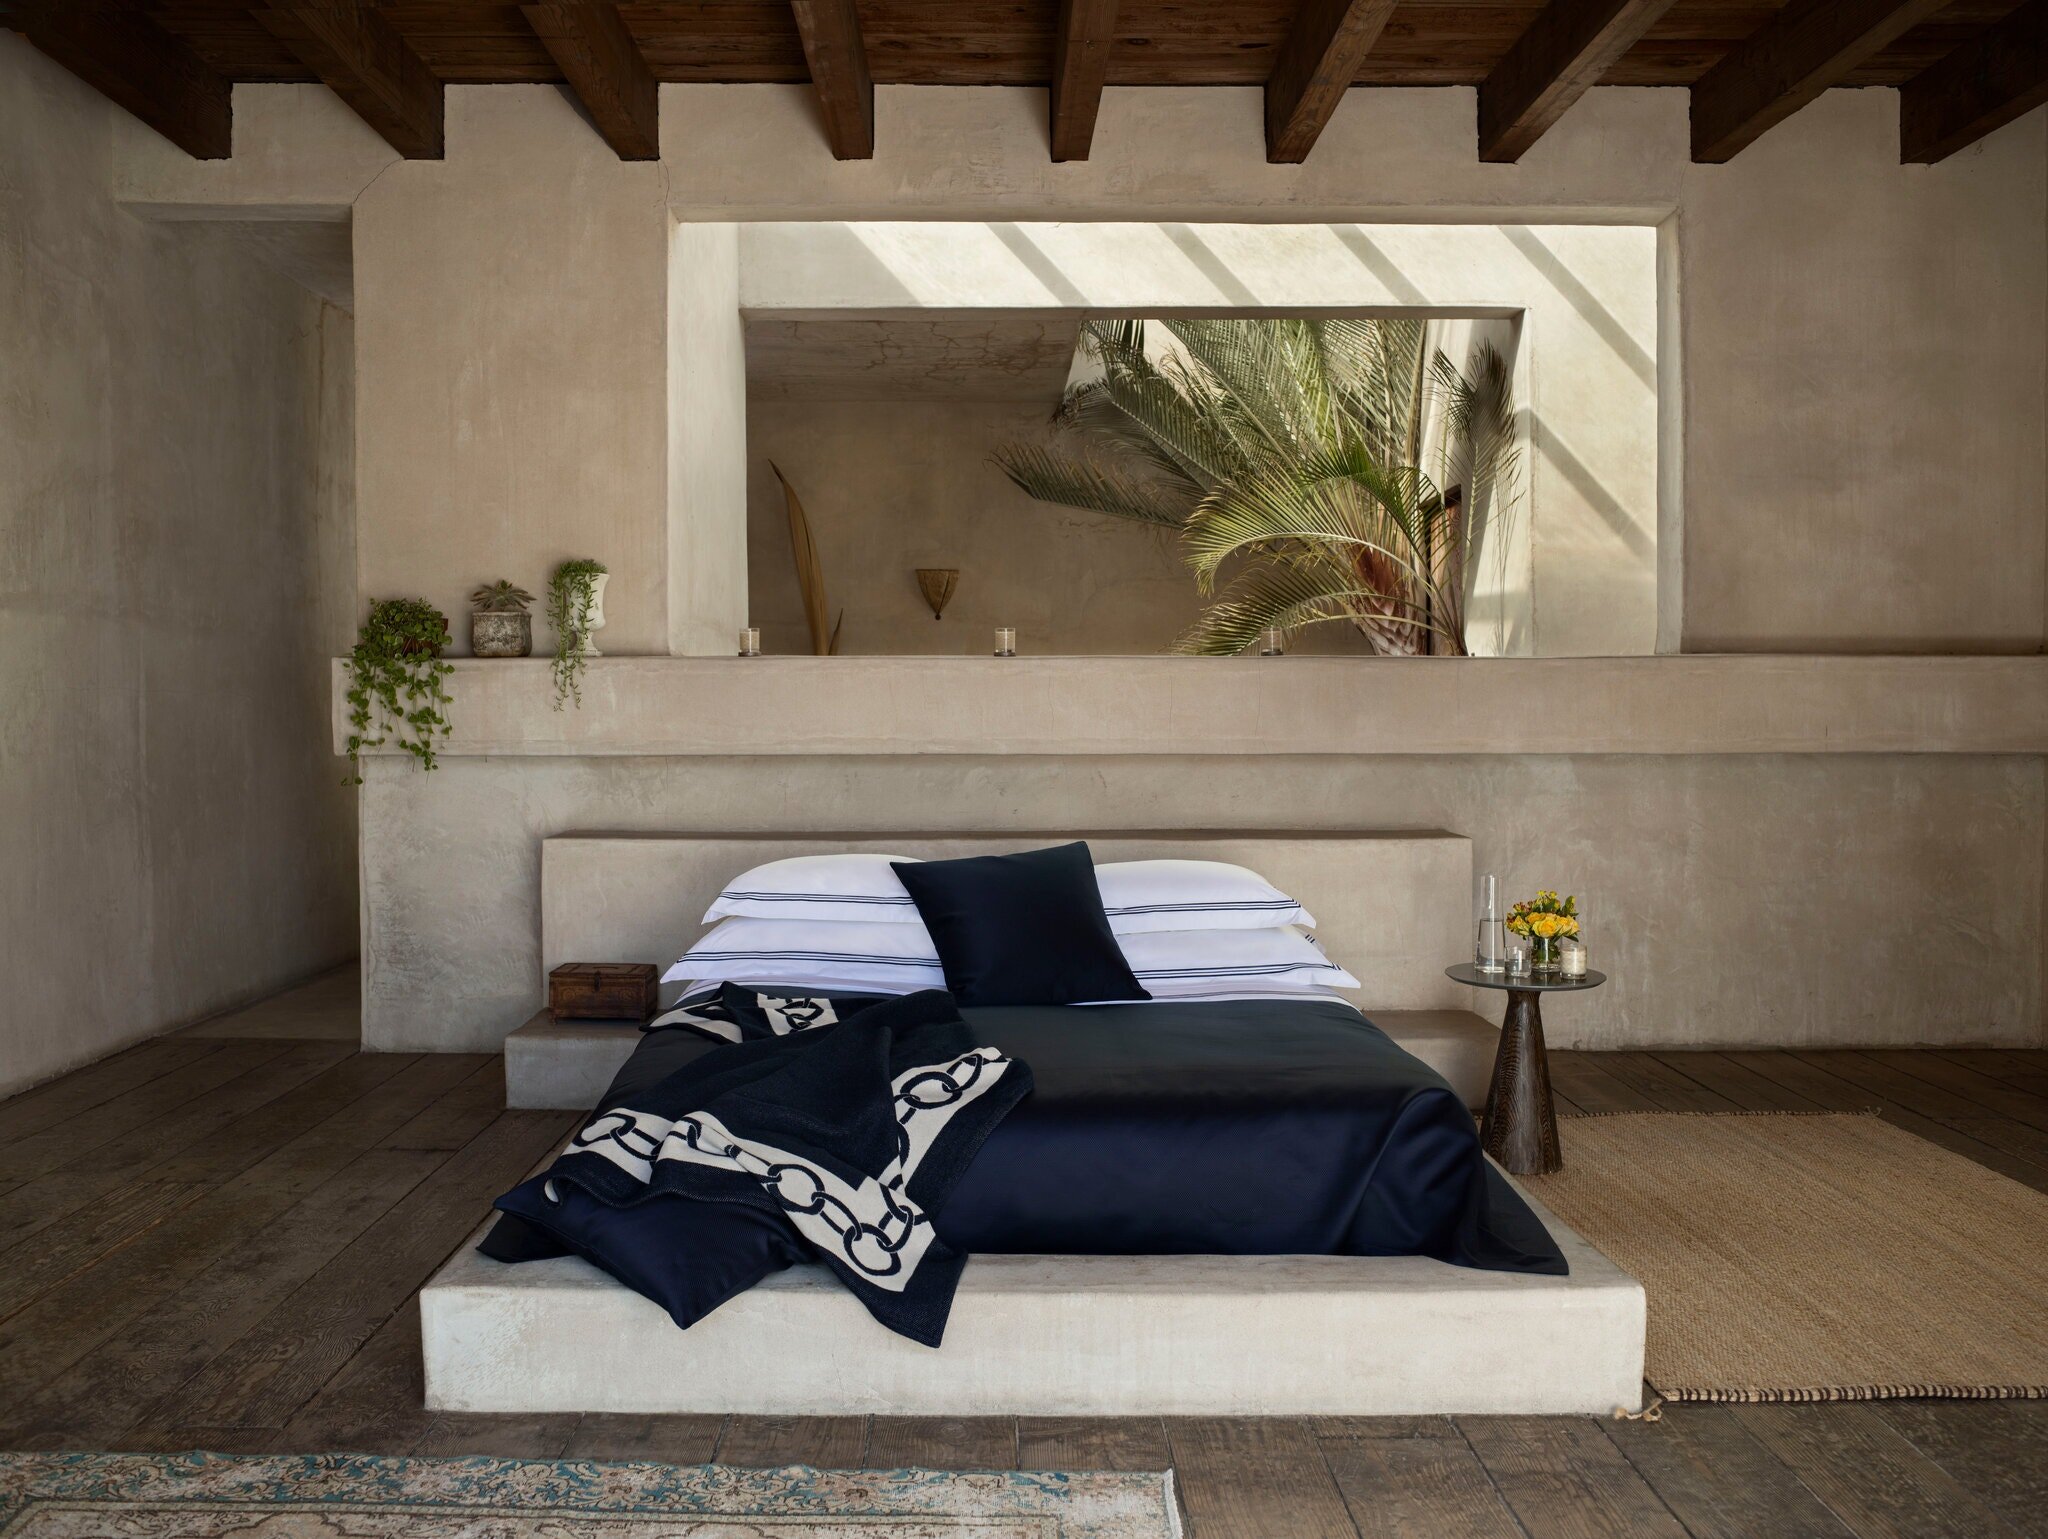  A bed styled by Frette shows a simple way to deal with pillows: Place a single decorative pillow in front of four stacked pillows used for sleeping. Credit Courtesy of Frette 